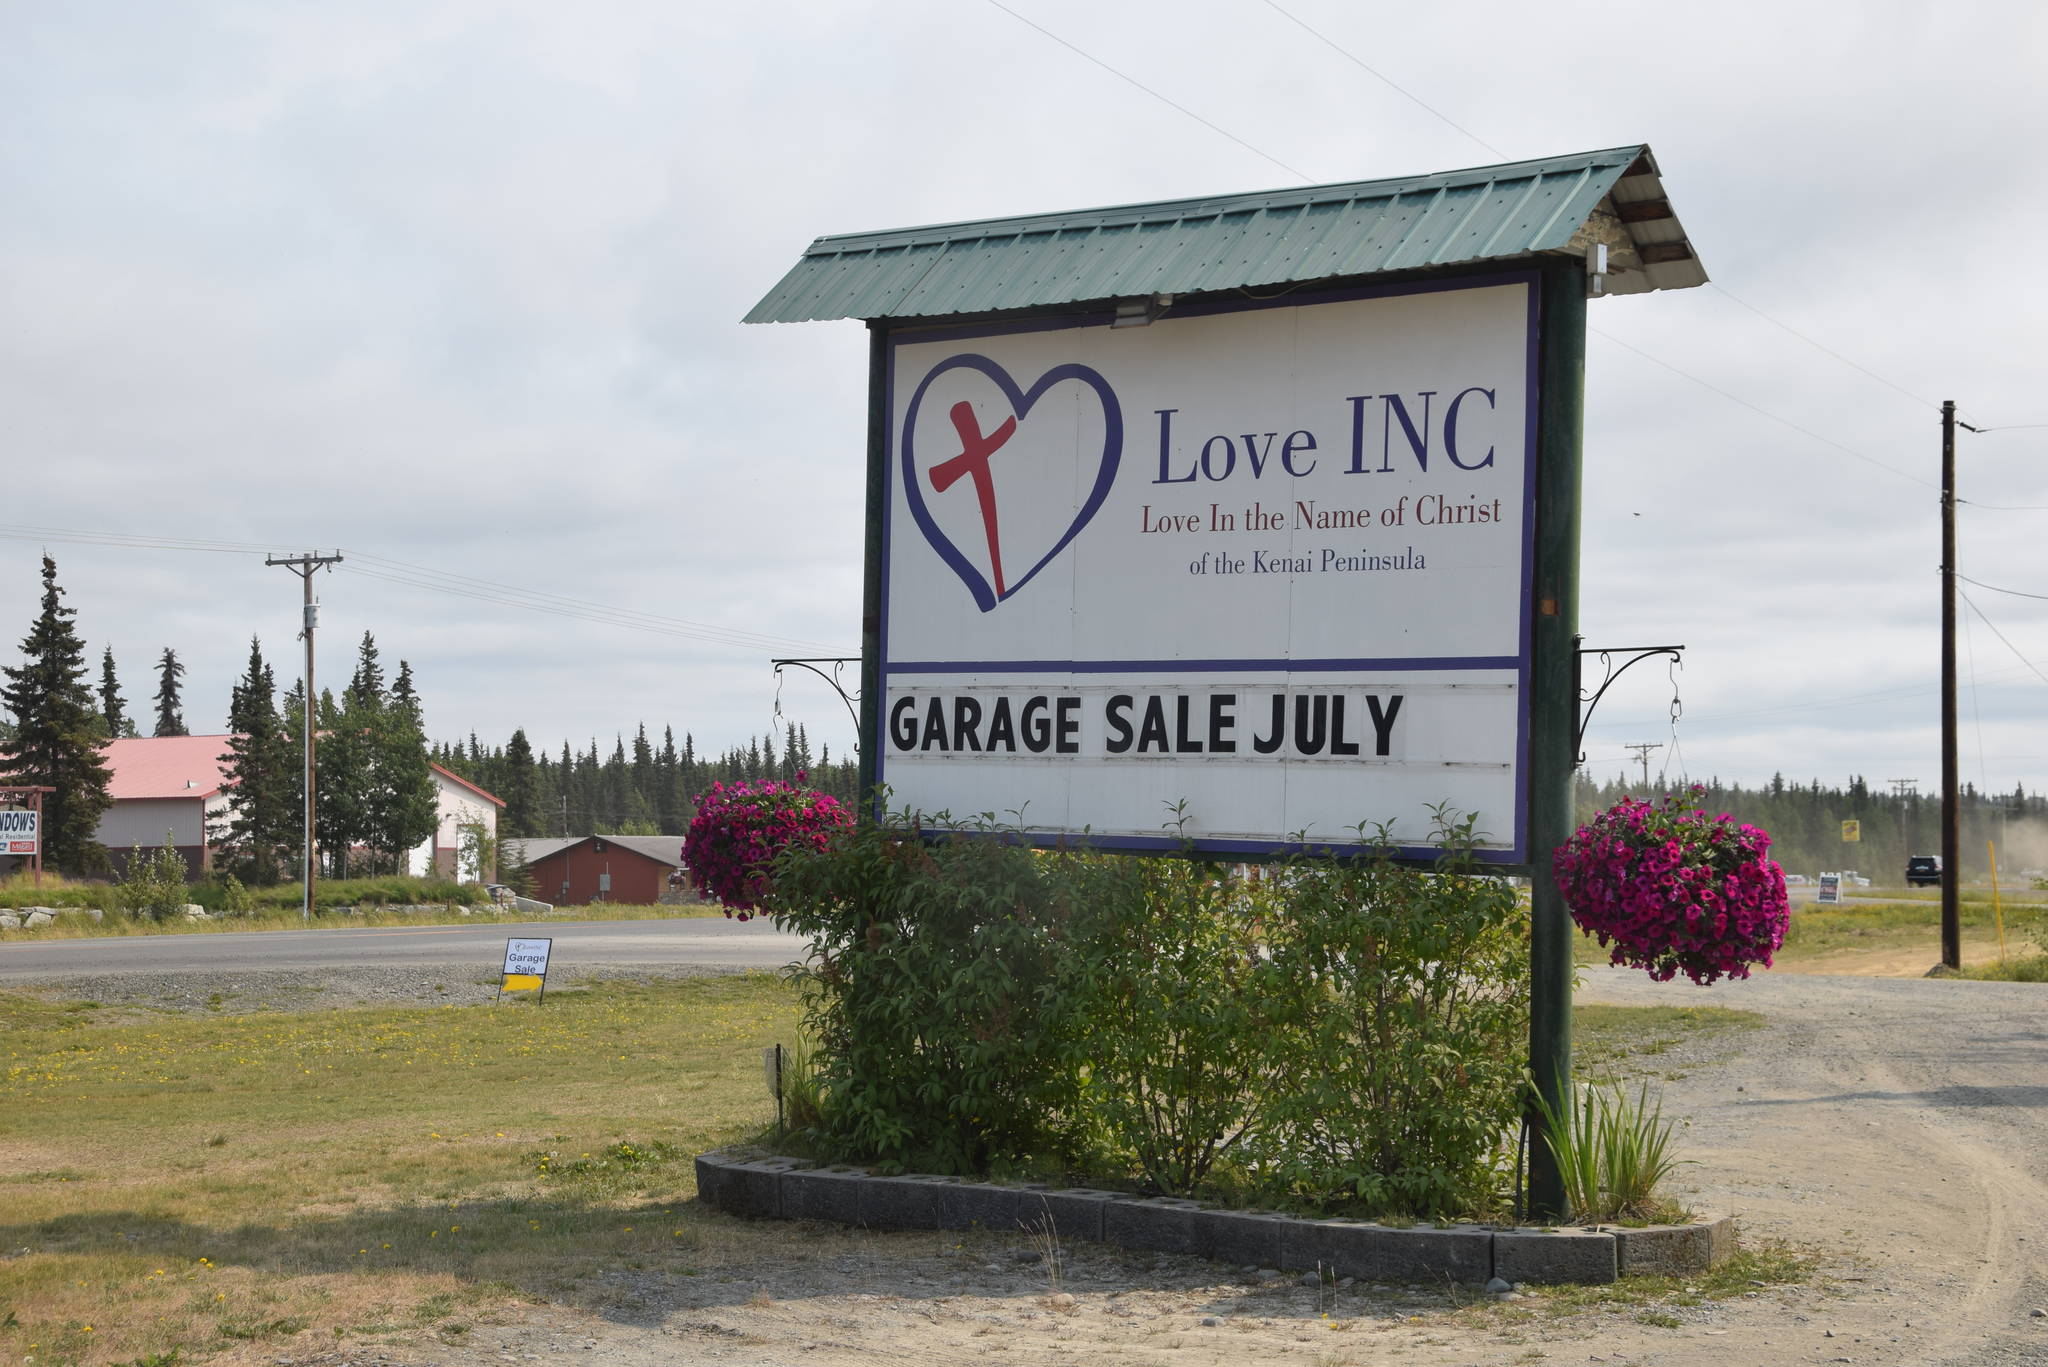 Love, INC in Soldotna, Alaska provides homelessness prevention and housing services to people on the Kenai Peninsula.(Photo by Brian Mazurek/Peninsula Clarion)